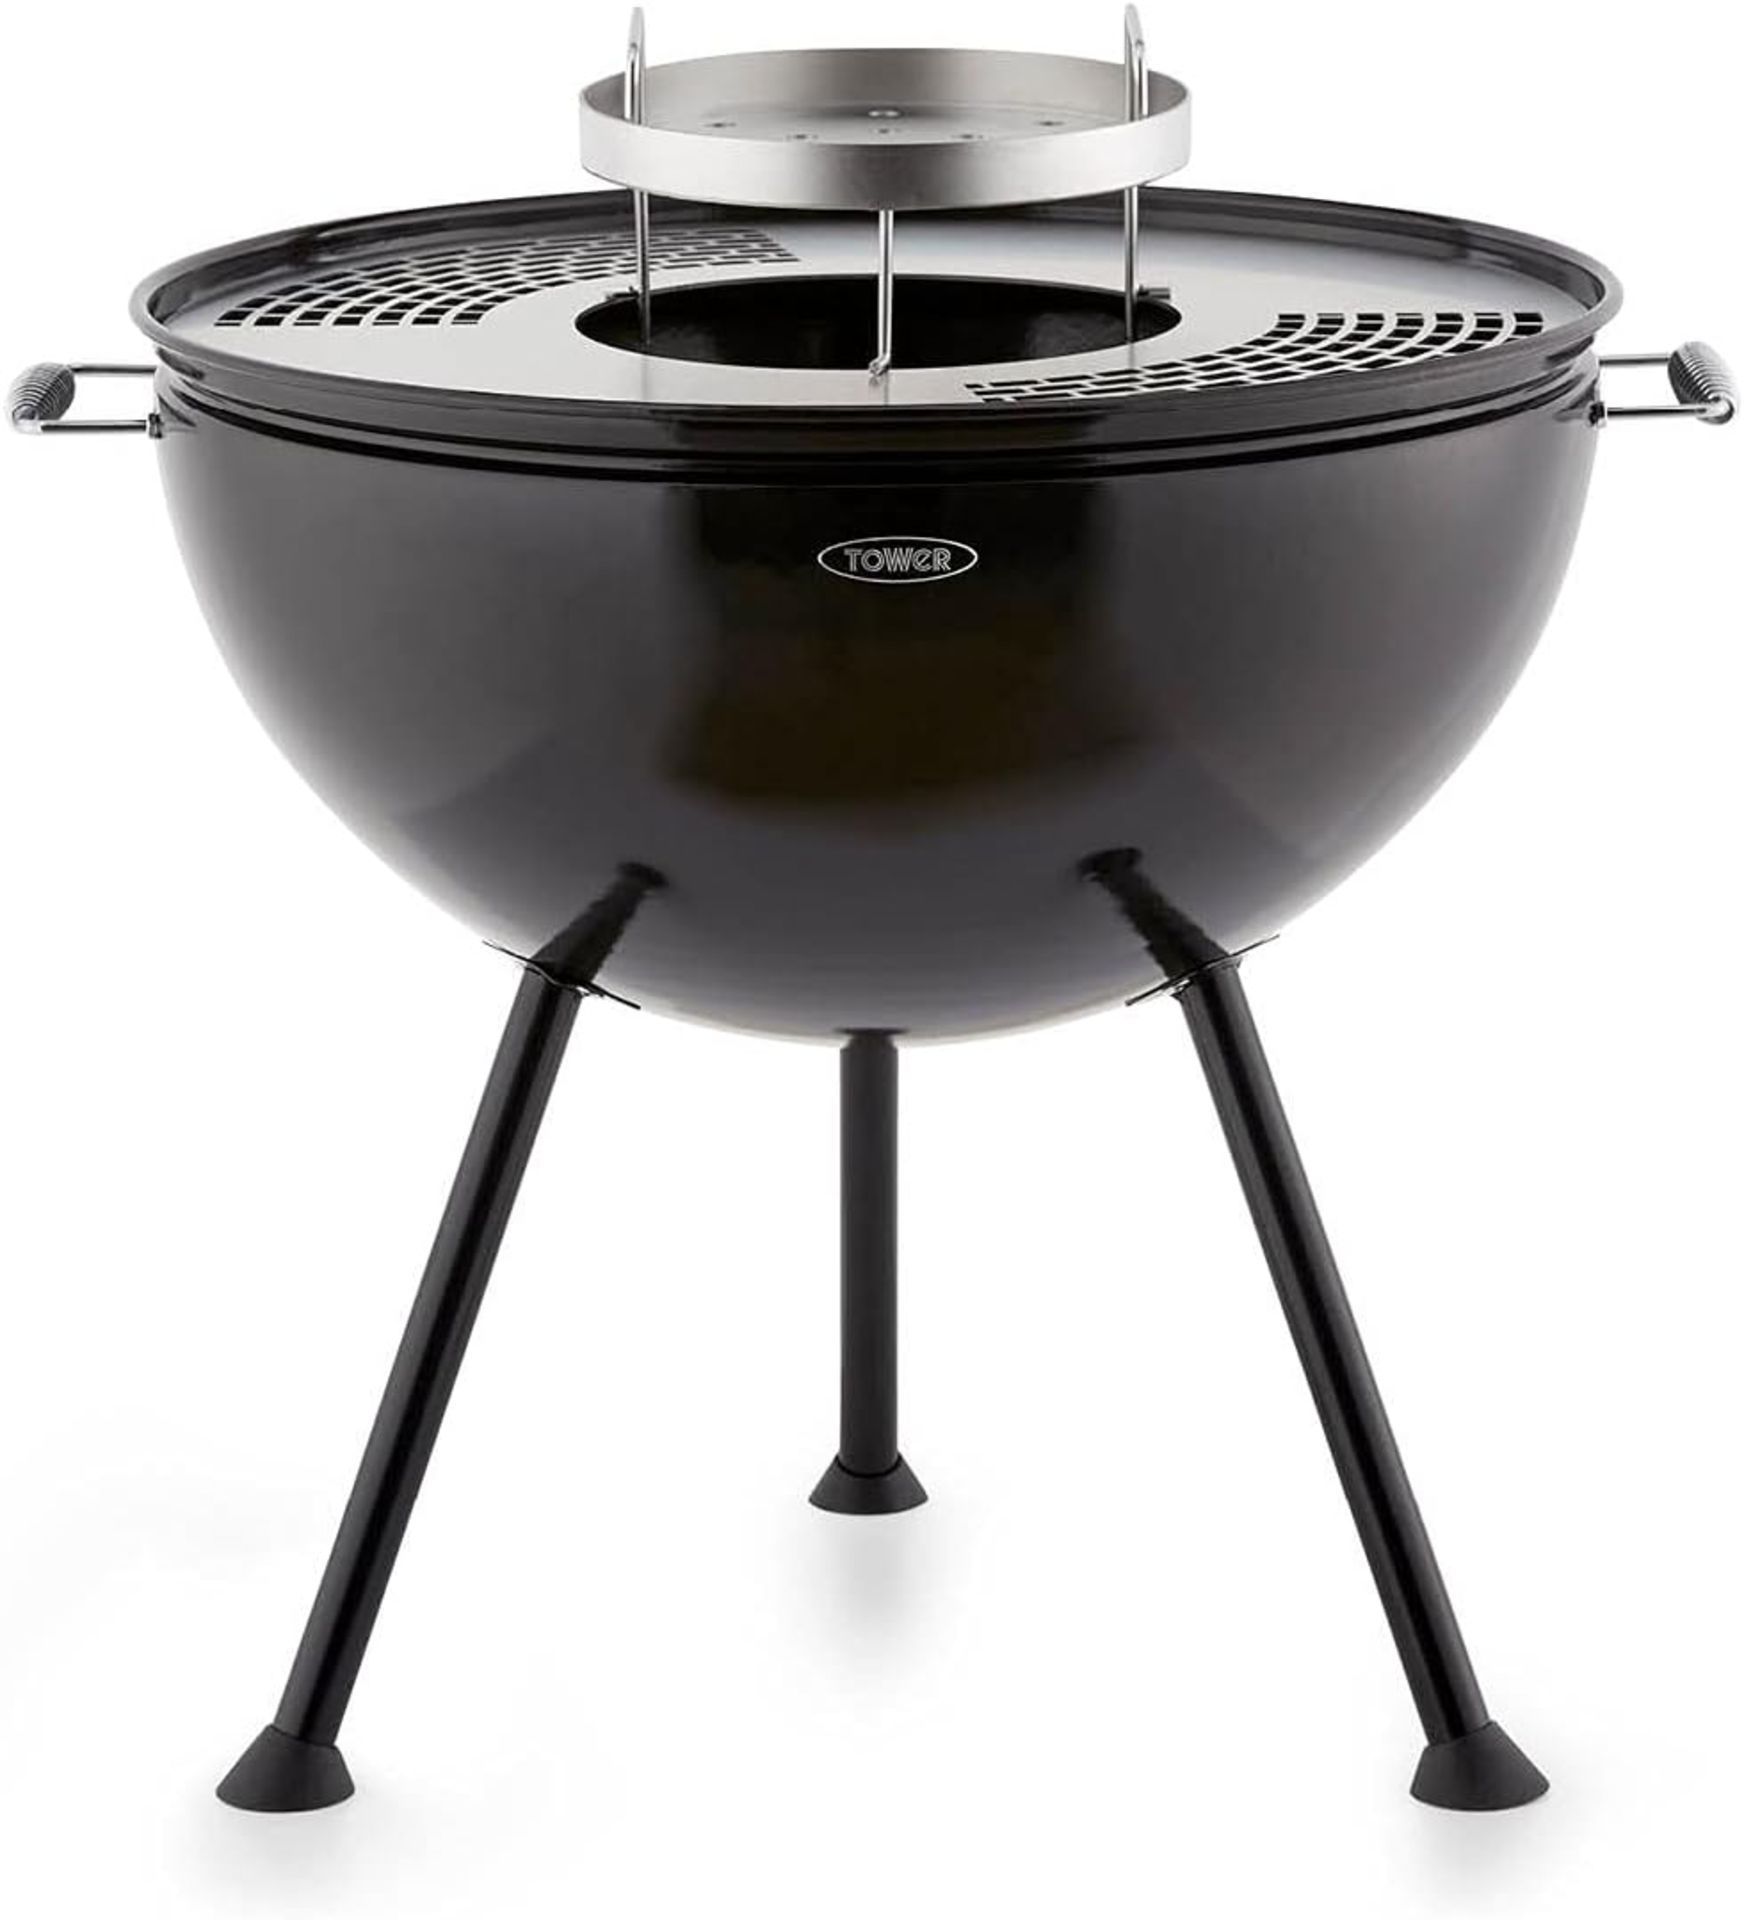 Brand New Tower Sphere Fire Pit and BBQ Grill, Black, DUAL USE â€“ This multi-functional pit n grill